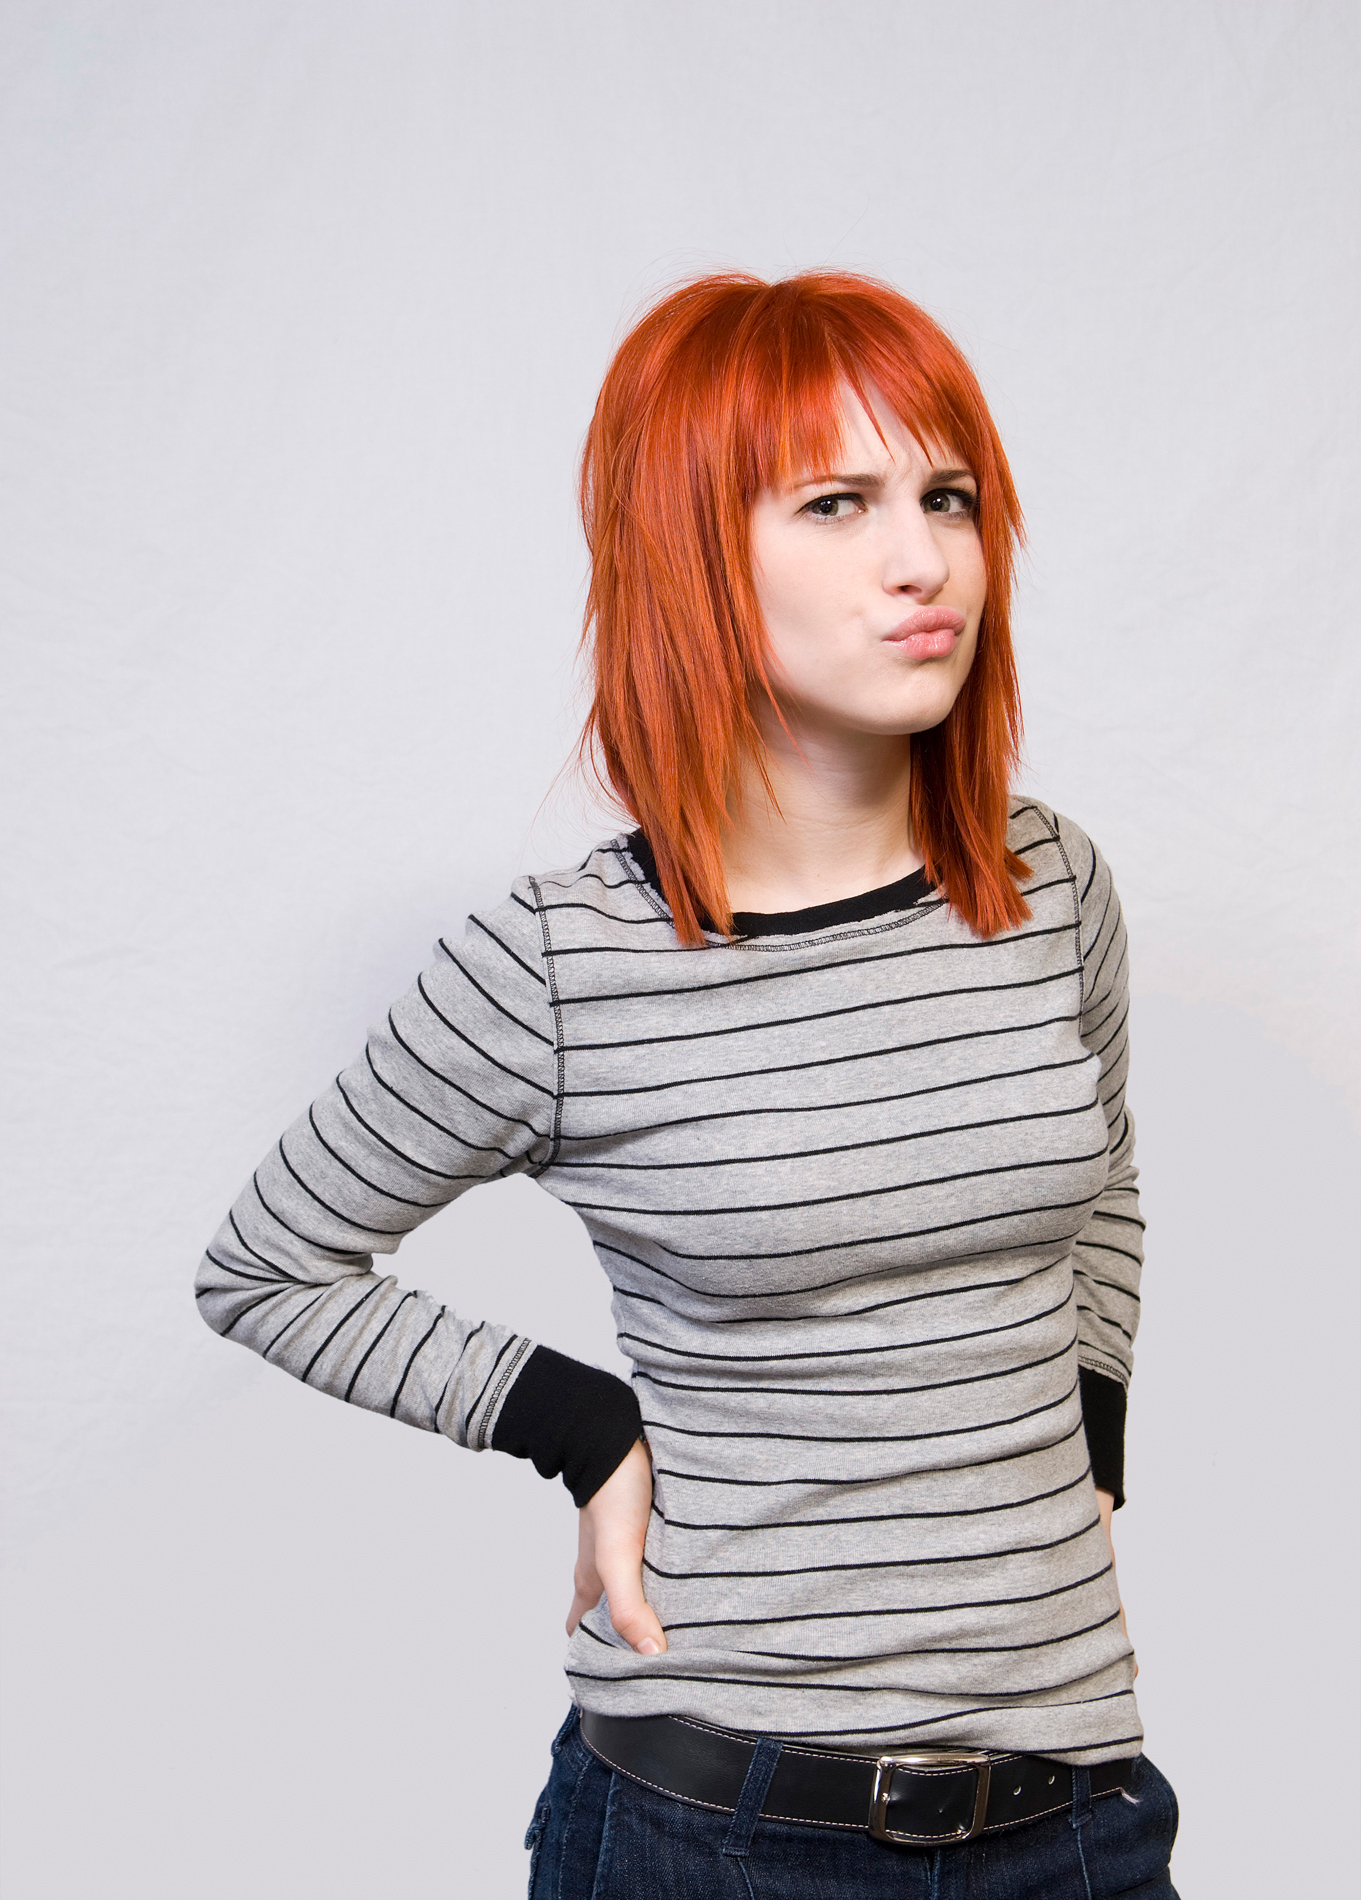 People 1361x1900 Hayley Williams redhead singer pale shoulder length hair short hair women duckface portrait display simple background Paramore dyed hair